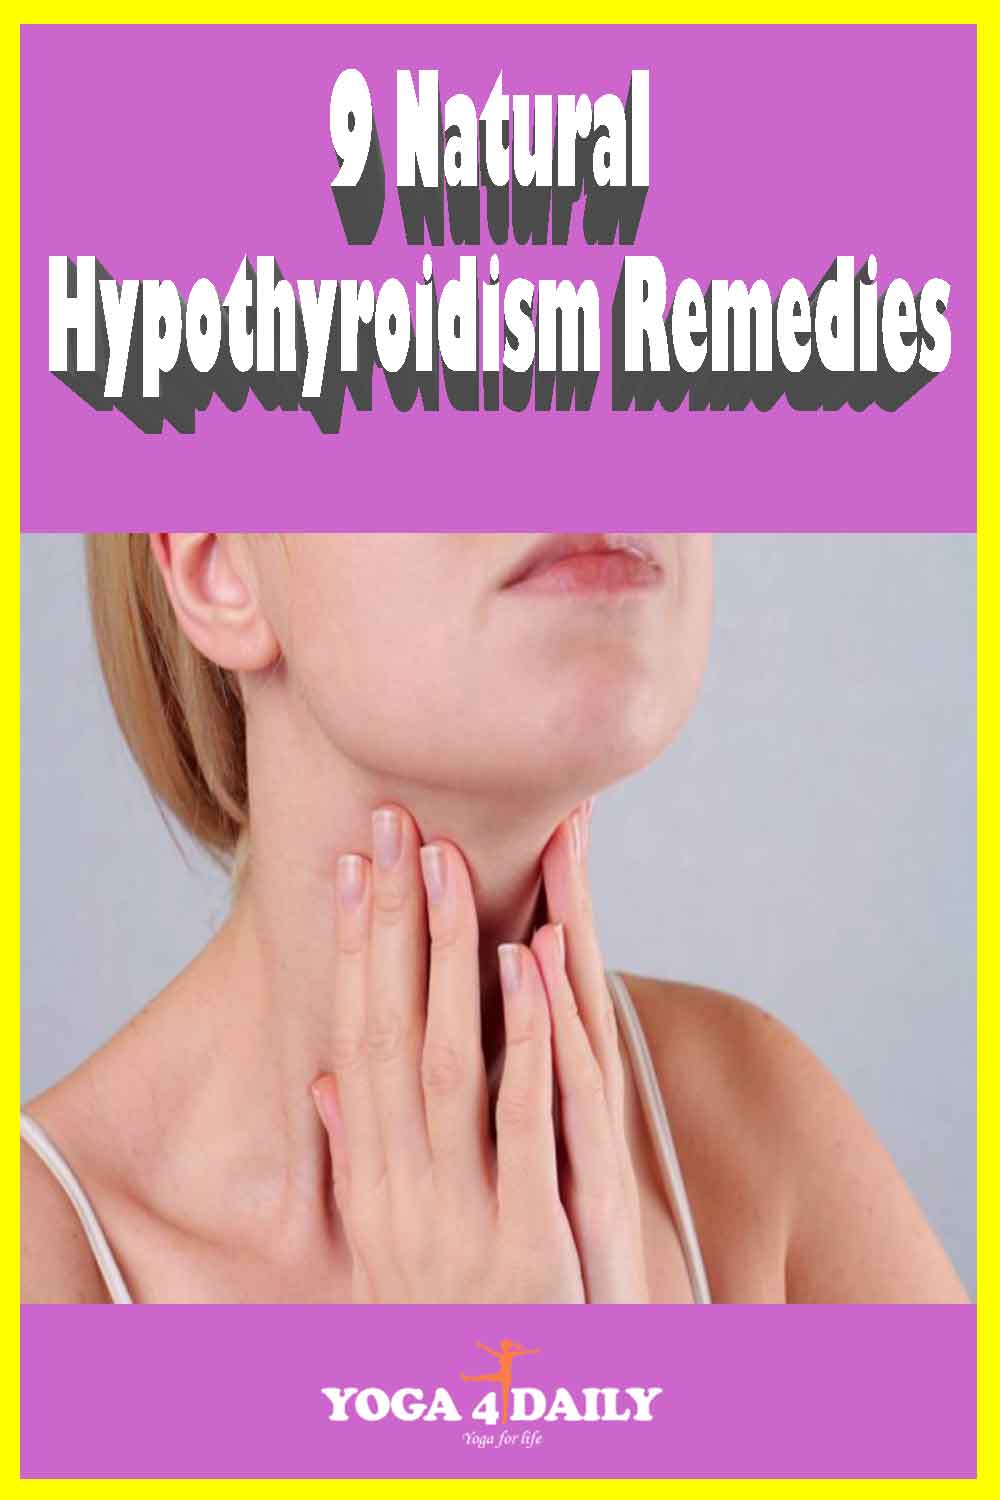 Hypothyroidism Symptoms, Causes and Treatments